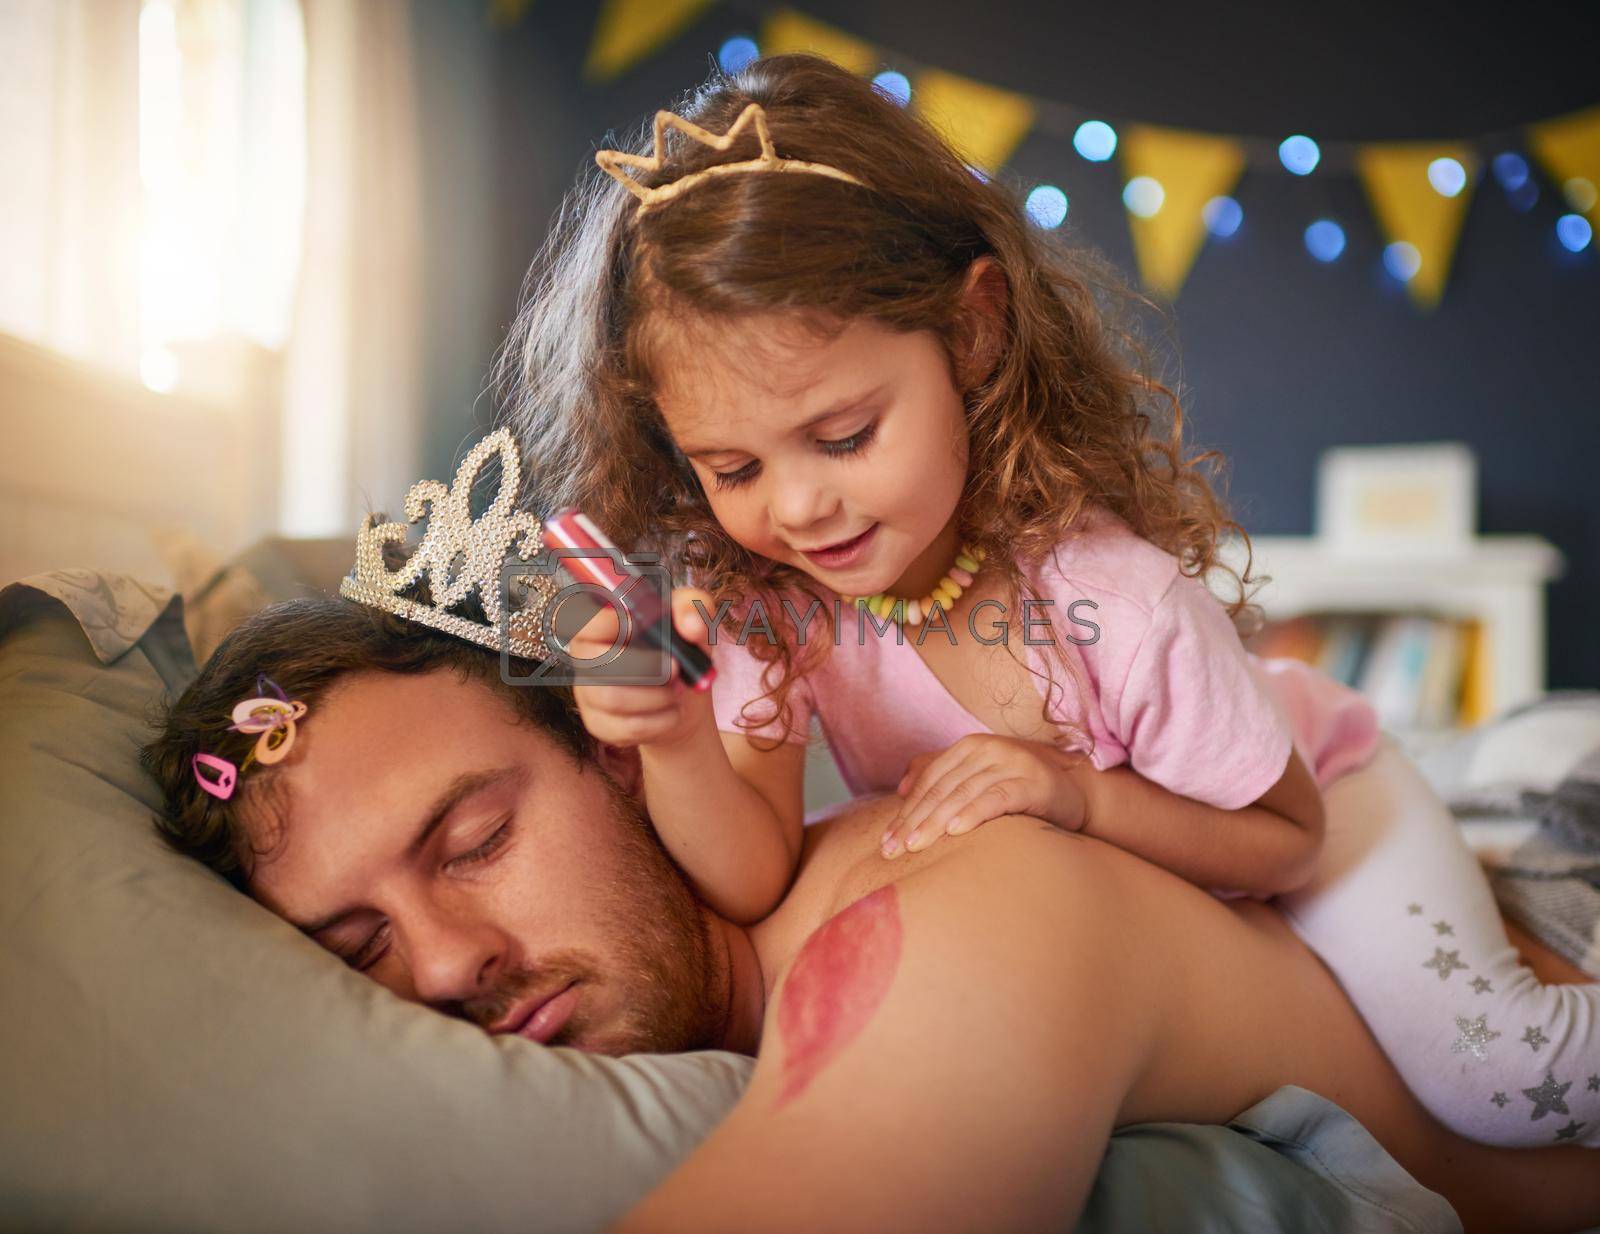 Royalty free image of Shes an artist and Dads the canvas. an adorable little girl drawing with lipstick on her fathers arm while he sleeps. by YuriArcurs